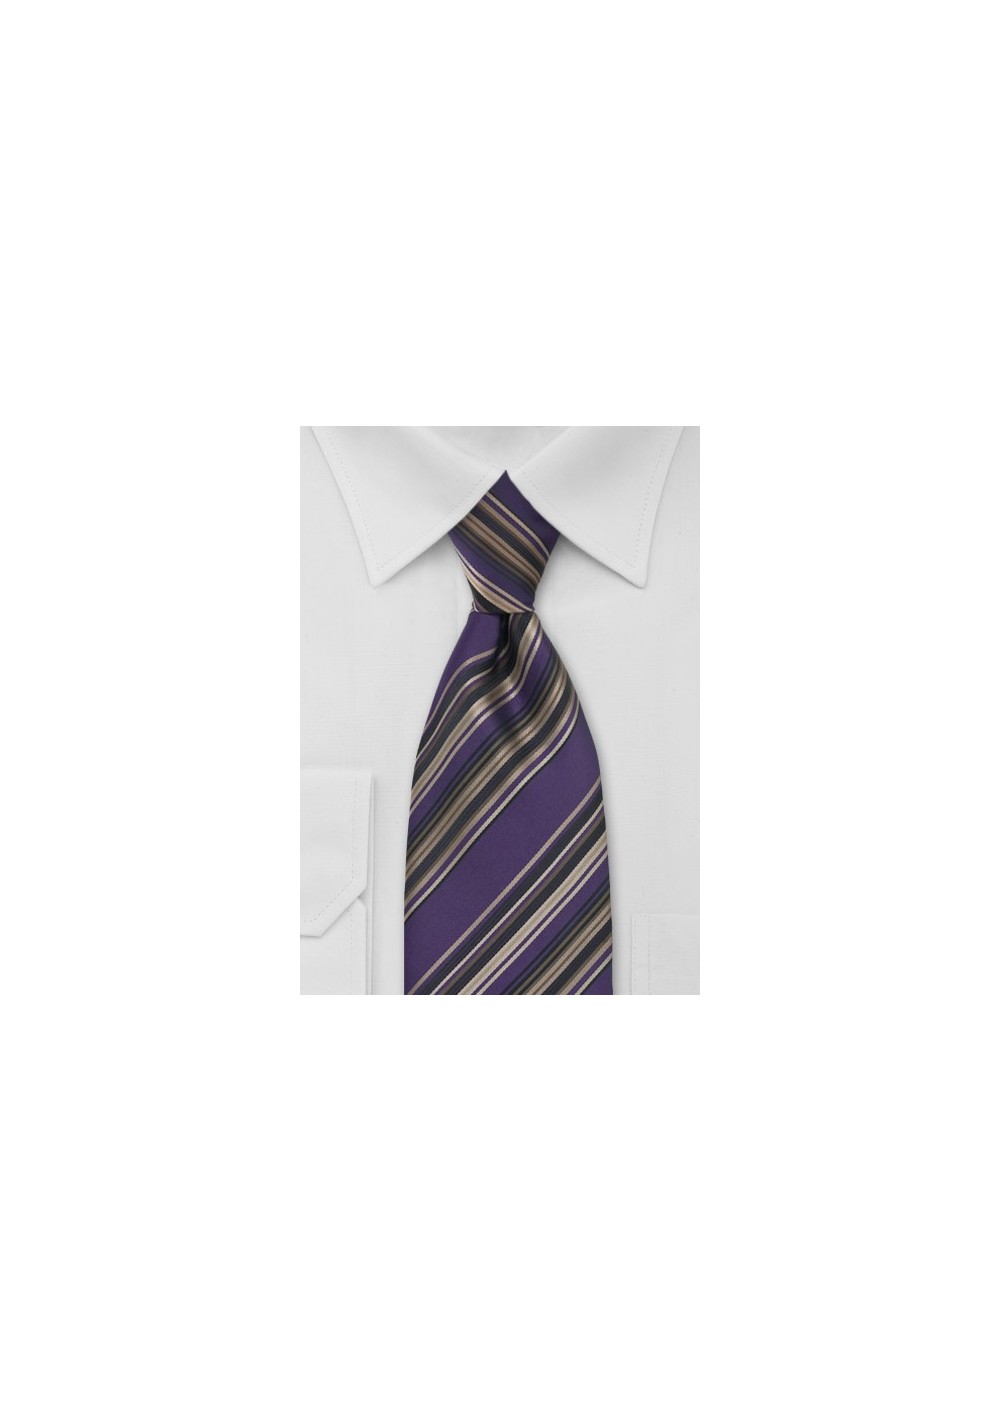 Purple and Brown Striped Tie